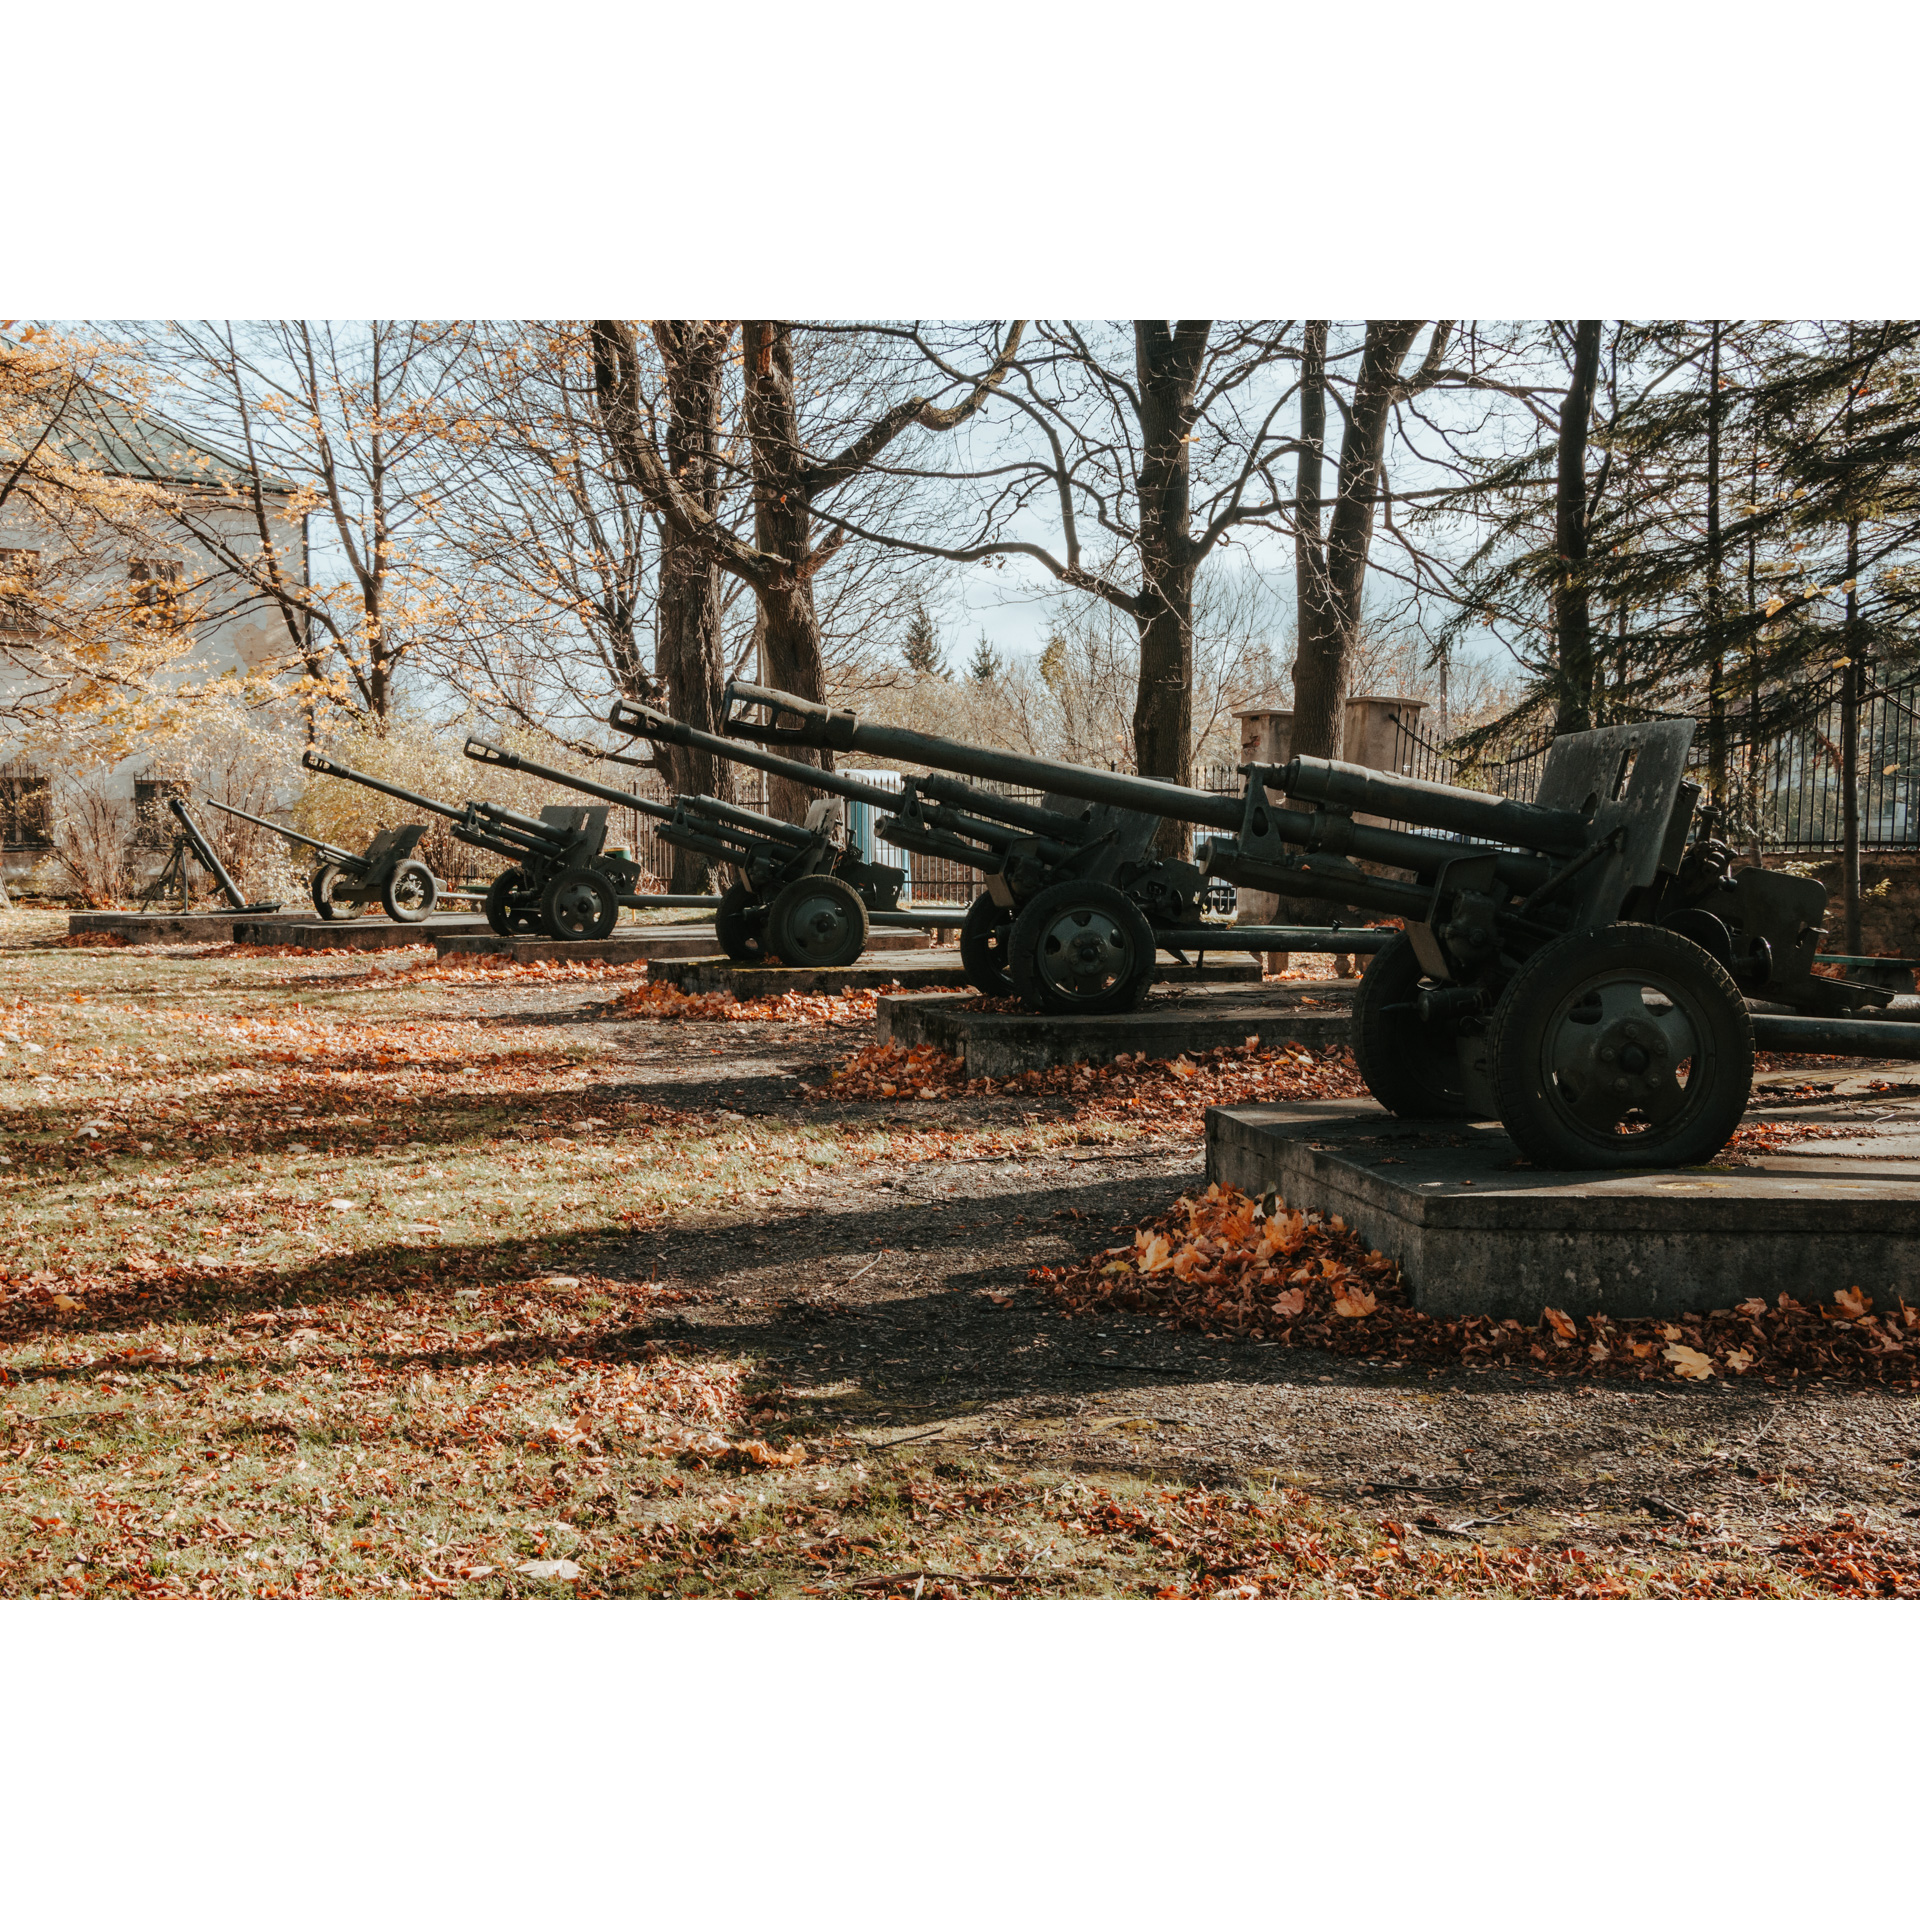 Five anti-tank guns on brick platforms, standing in a clearing among trees